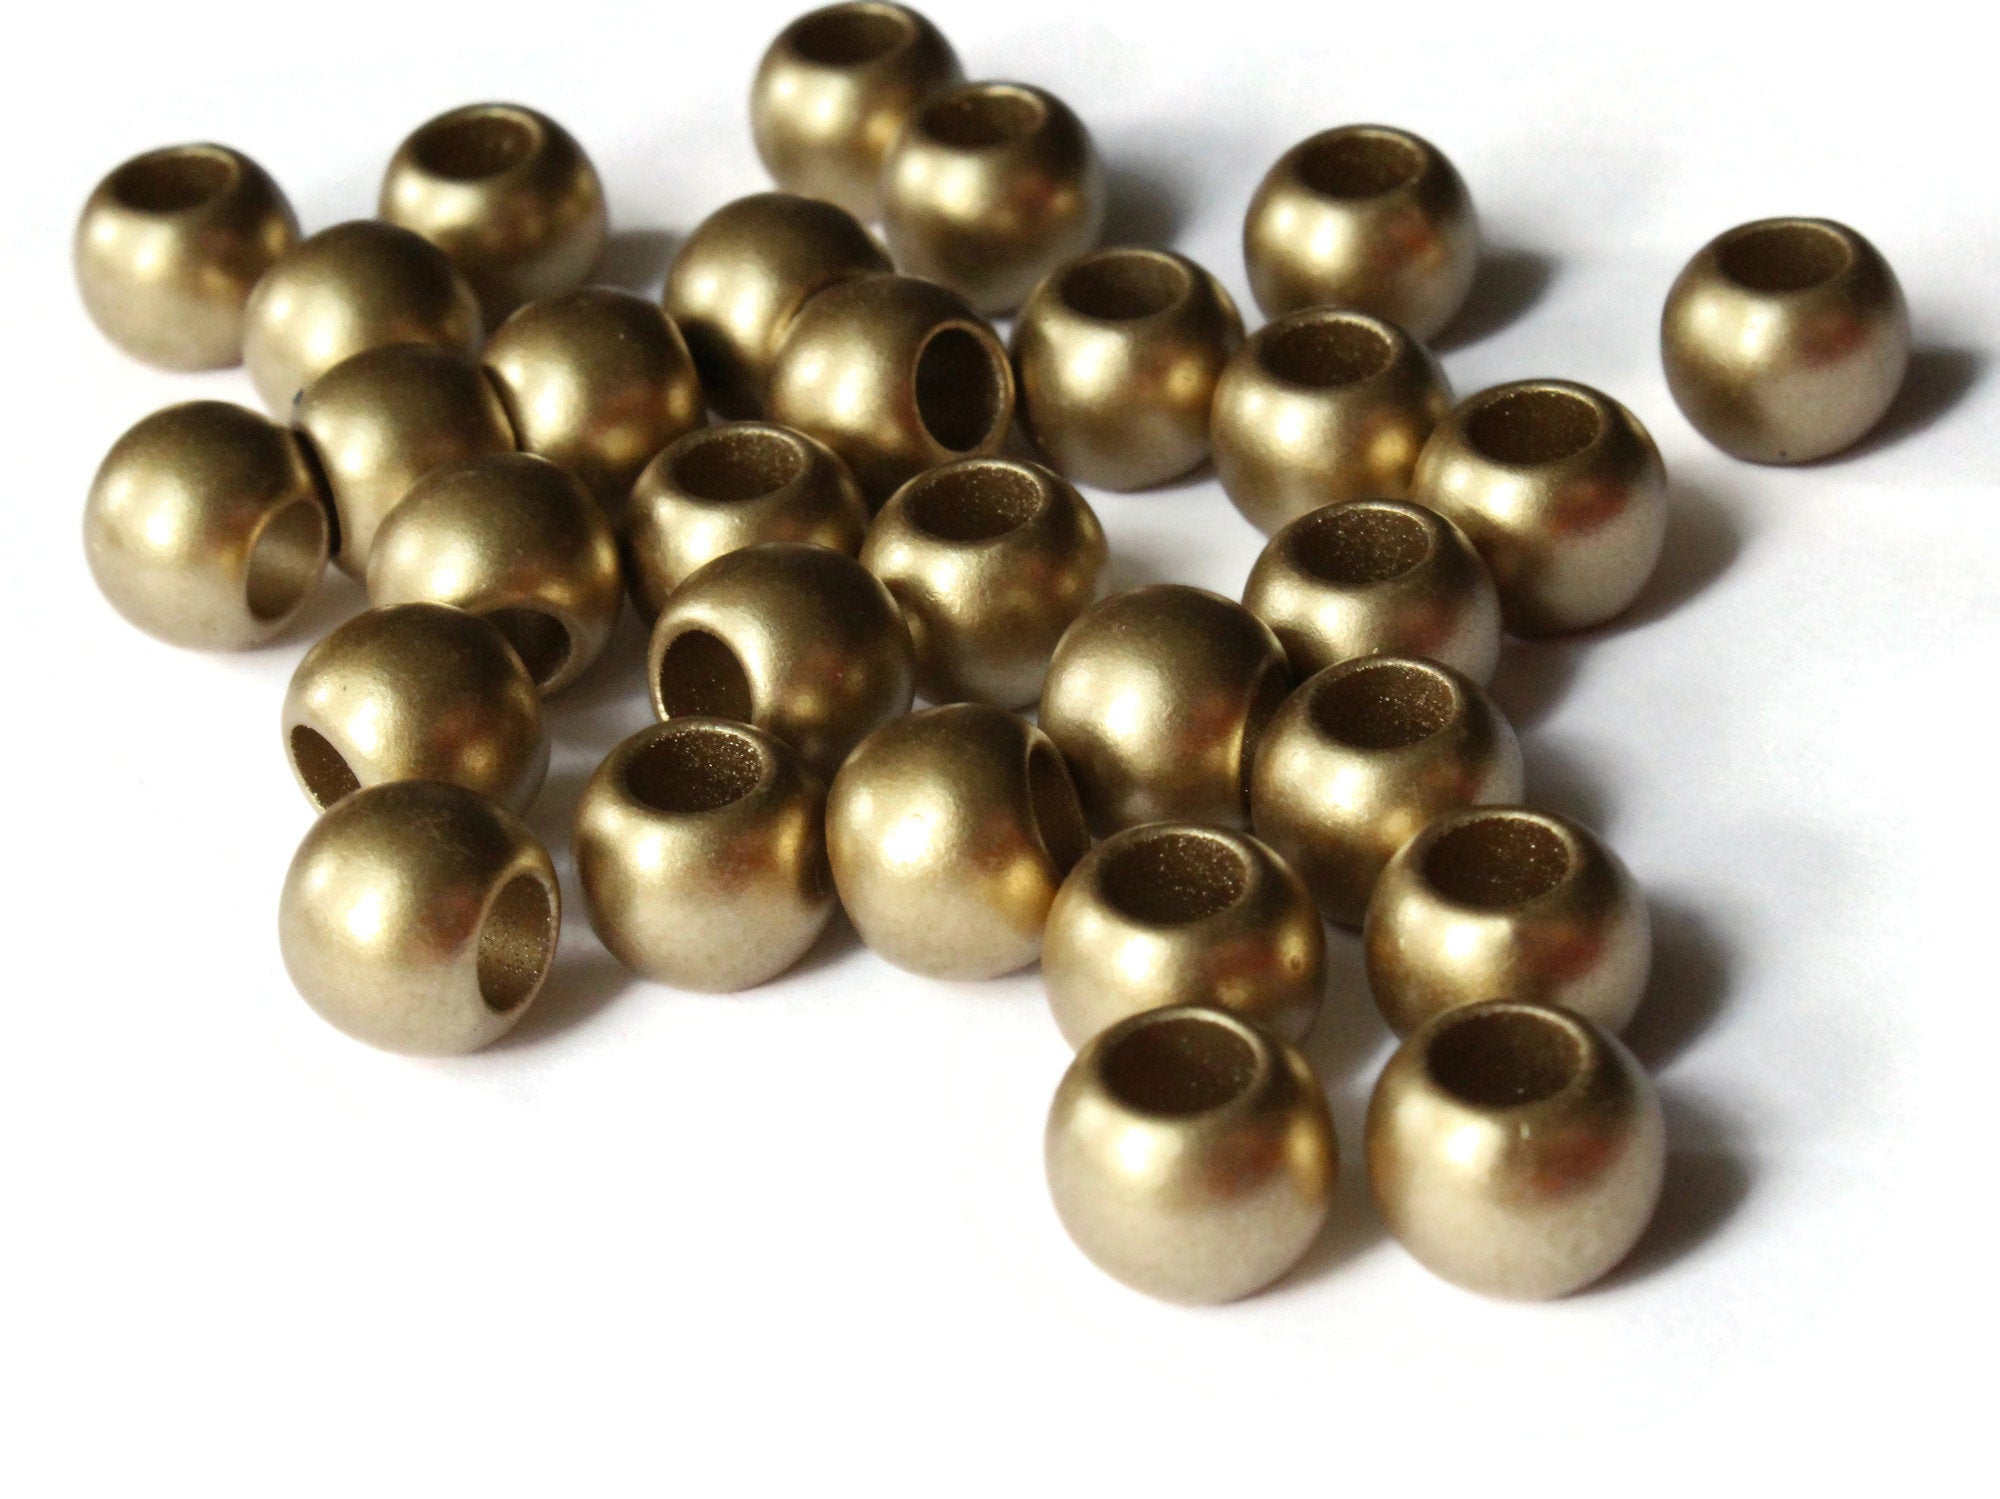 30 12mm Gold Acrylic Tube Beads to String Large Hole Beads by Smileyboy | Michaels